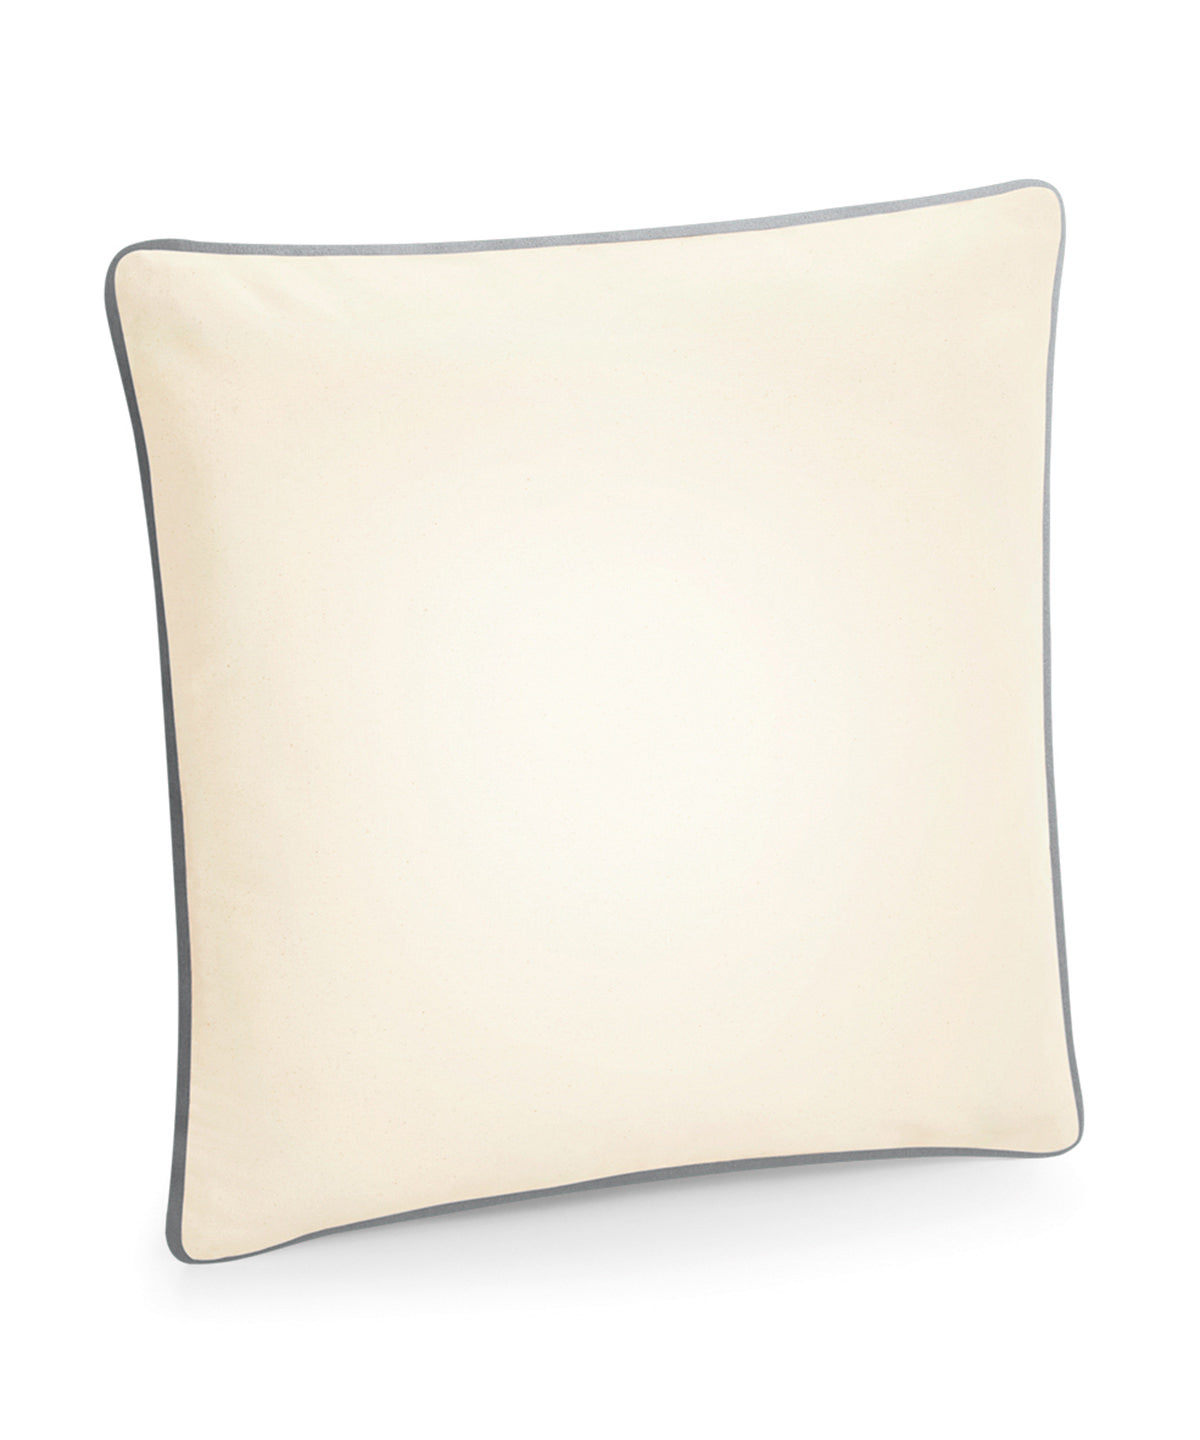 Outline Portrait Embroidered Cushion Cover